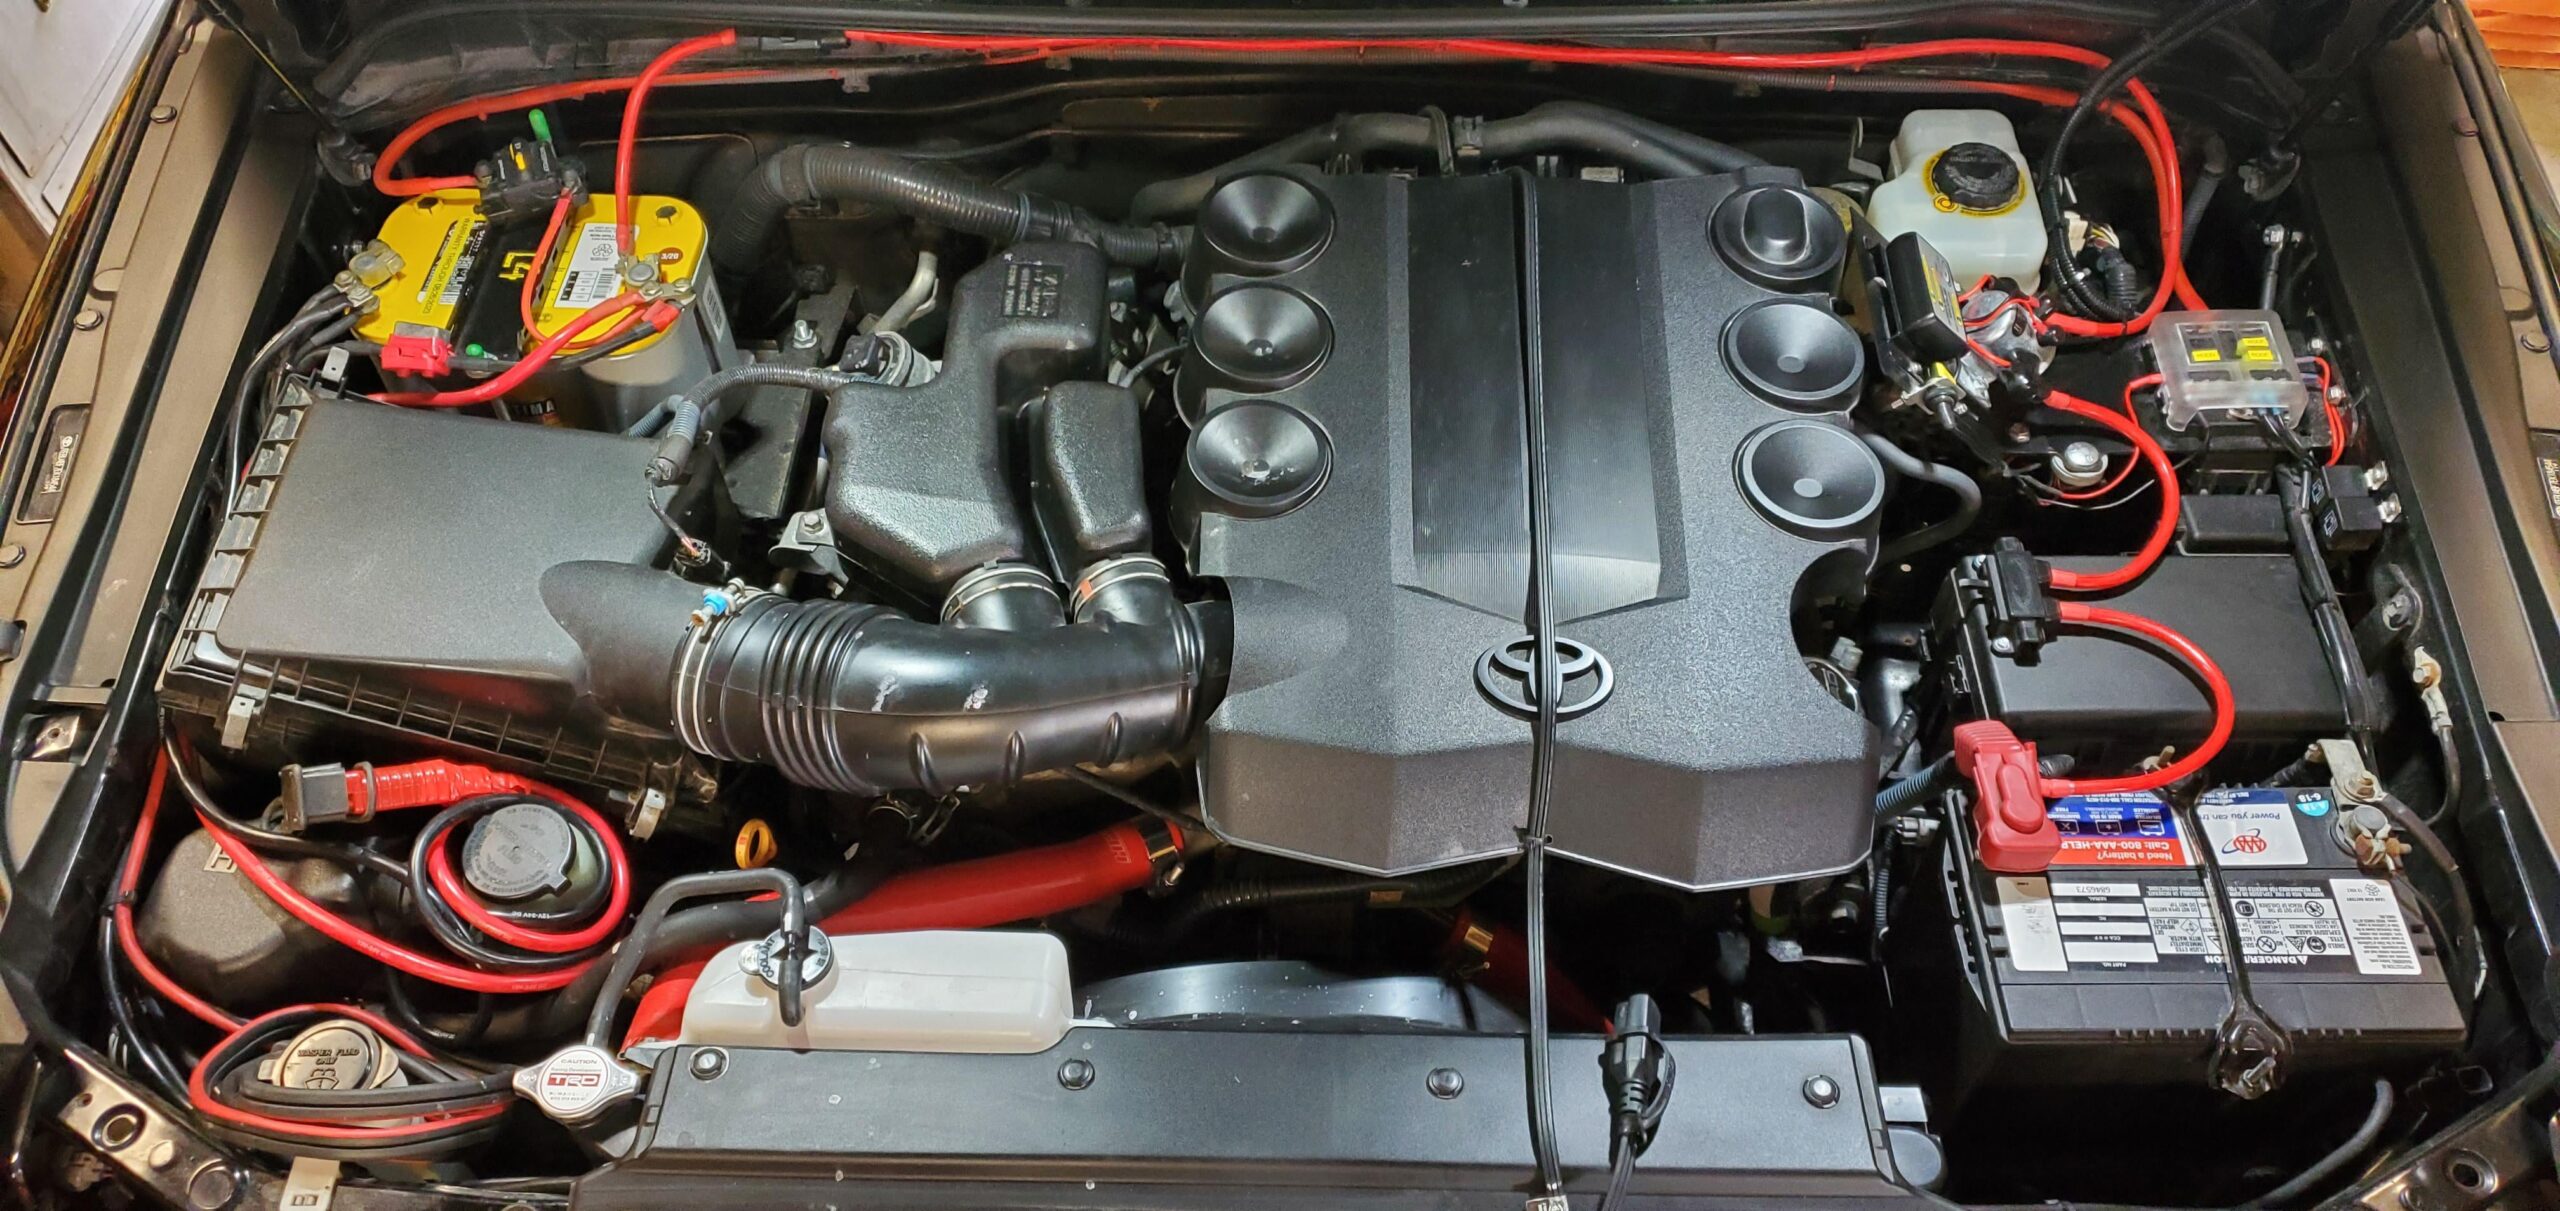 Dual Battery System Setup In Engine Bay